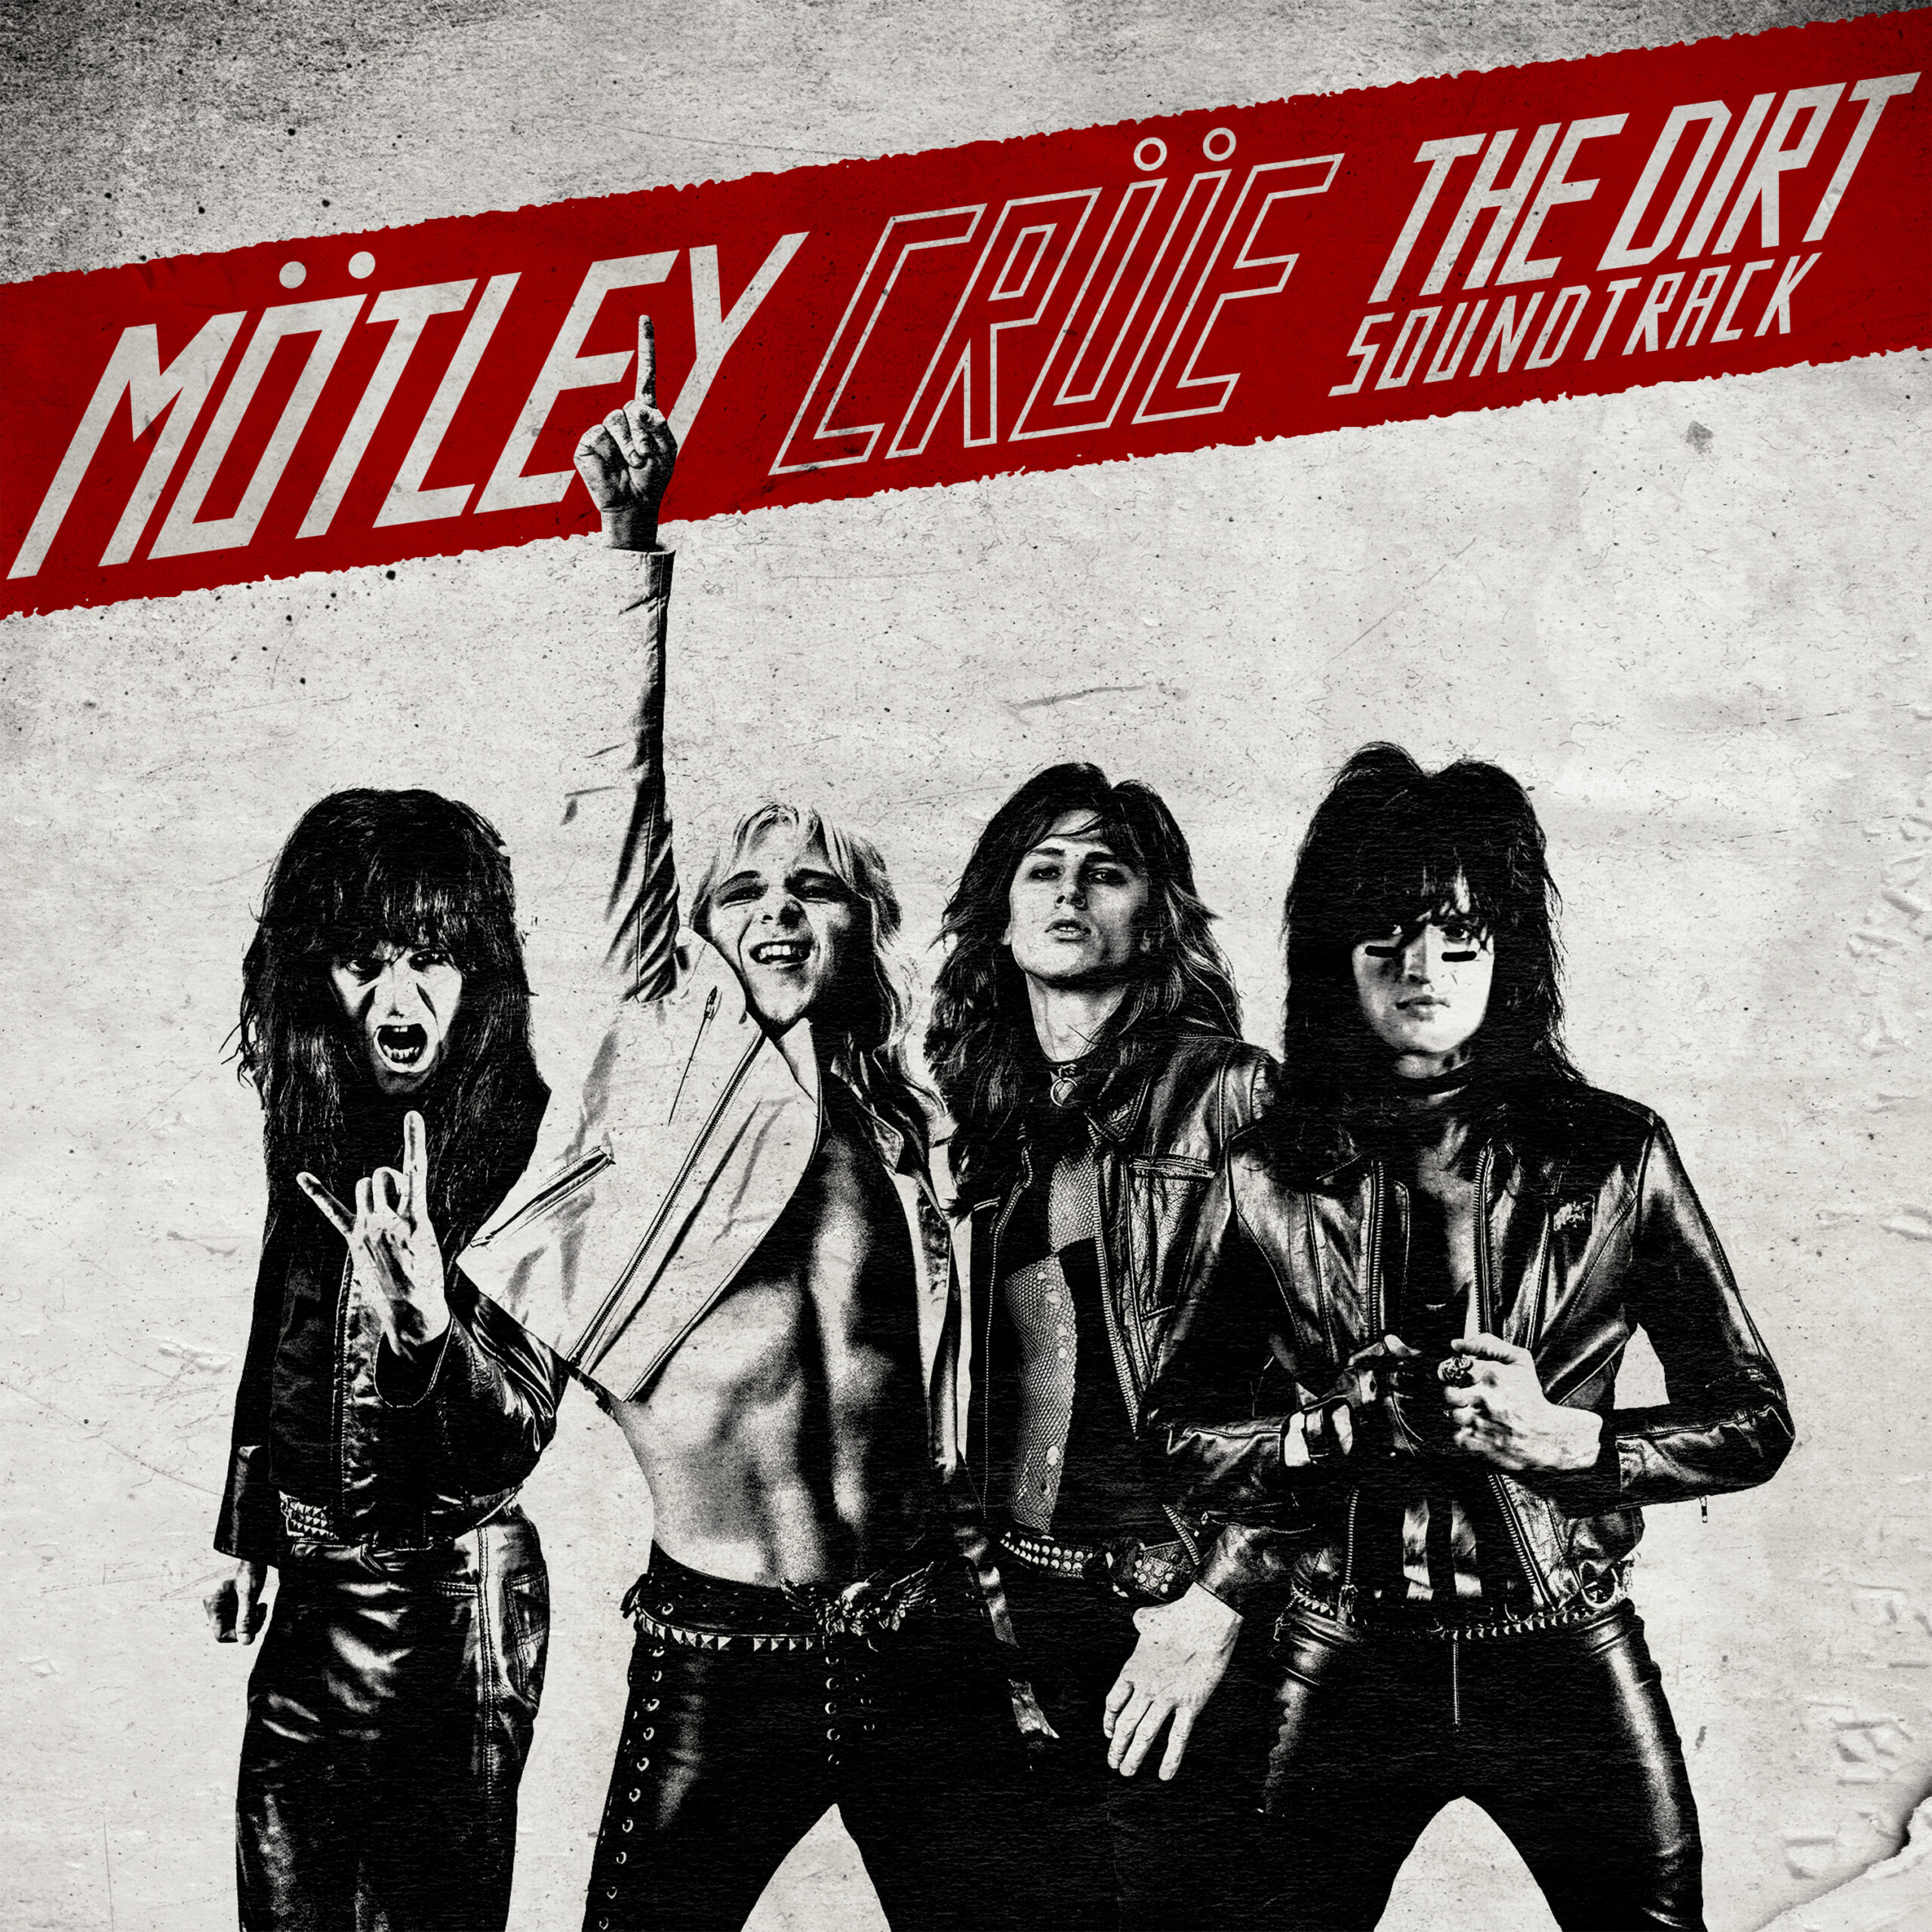 ﻿MÖTLEY CRÜE  RELEASES THE DIRT SOUNDTRACK TODAY